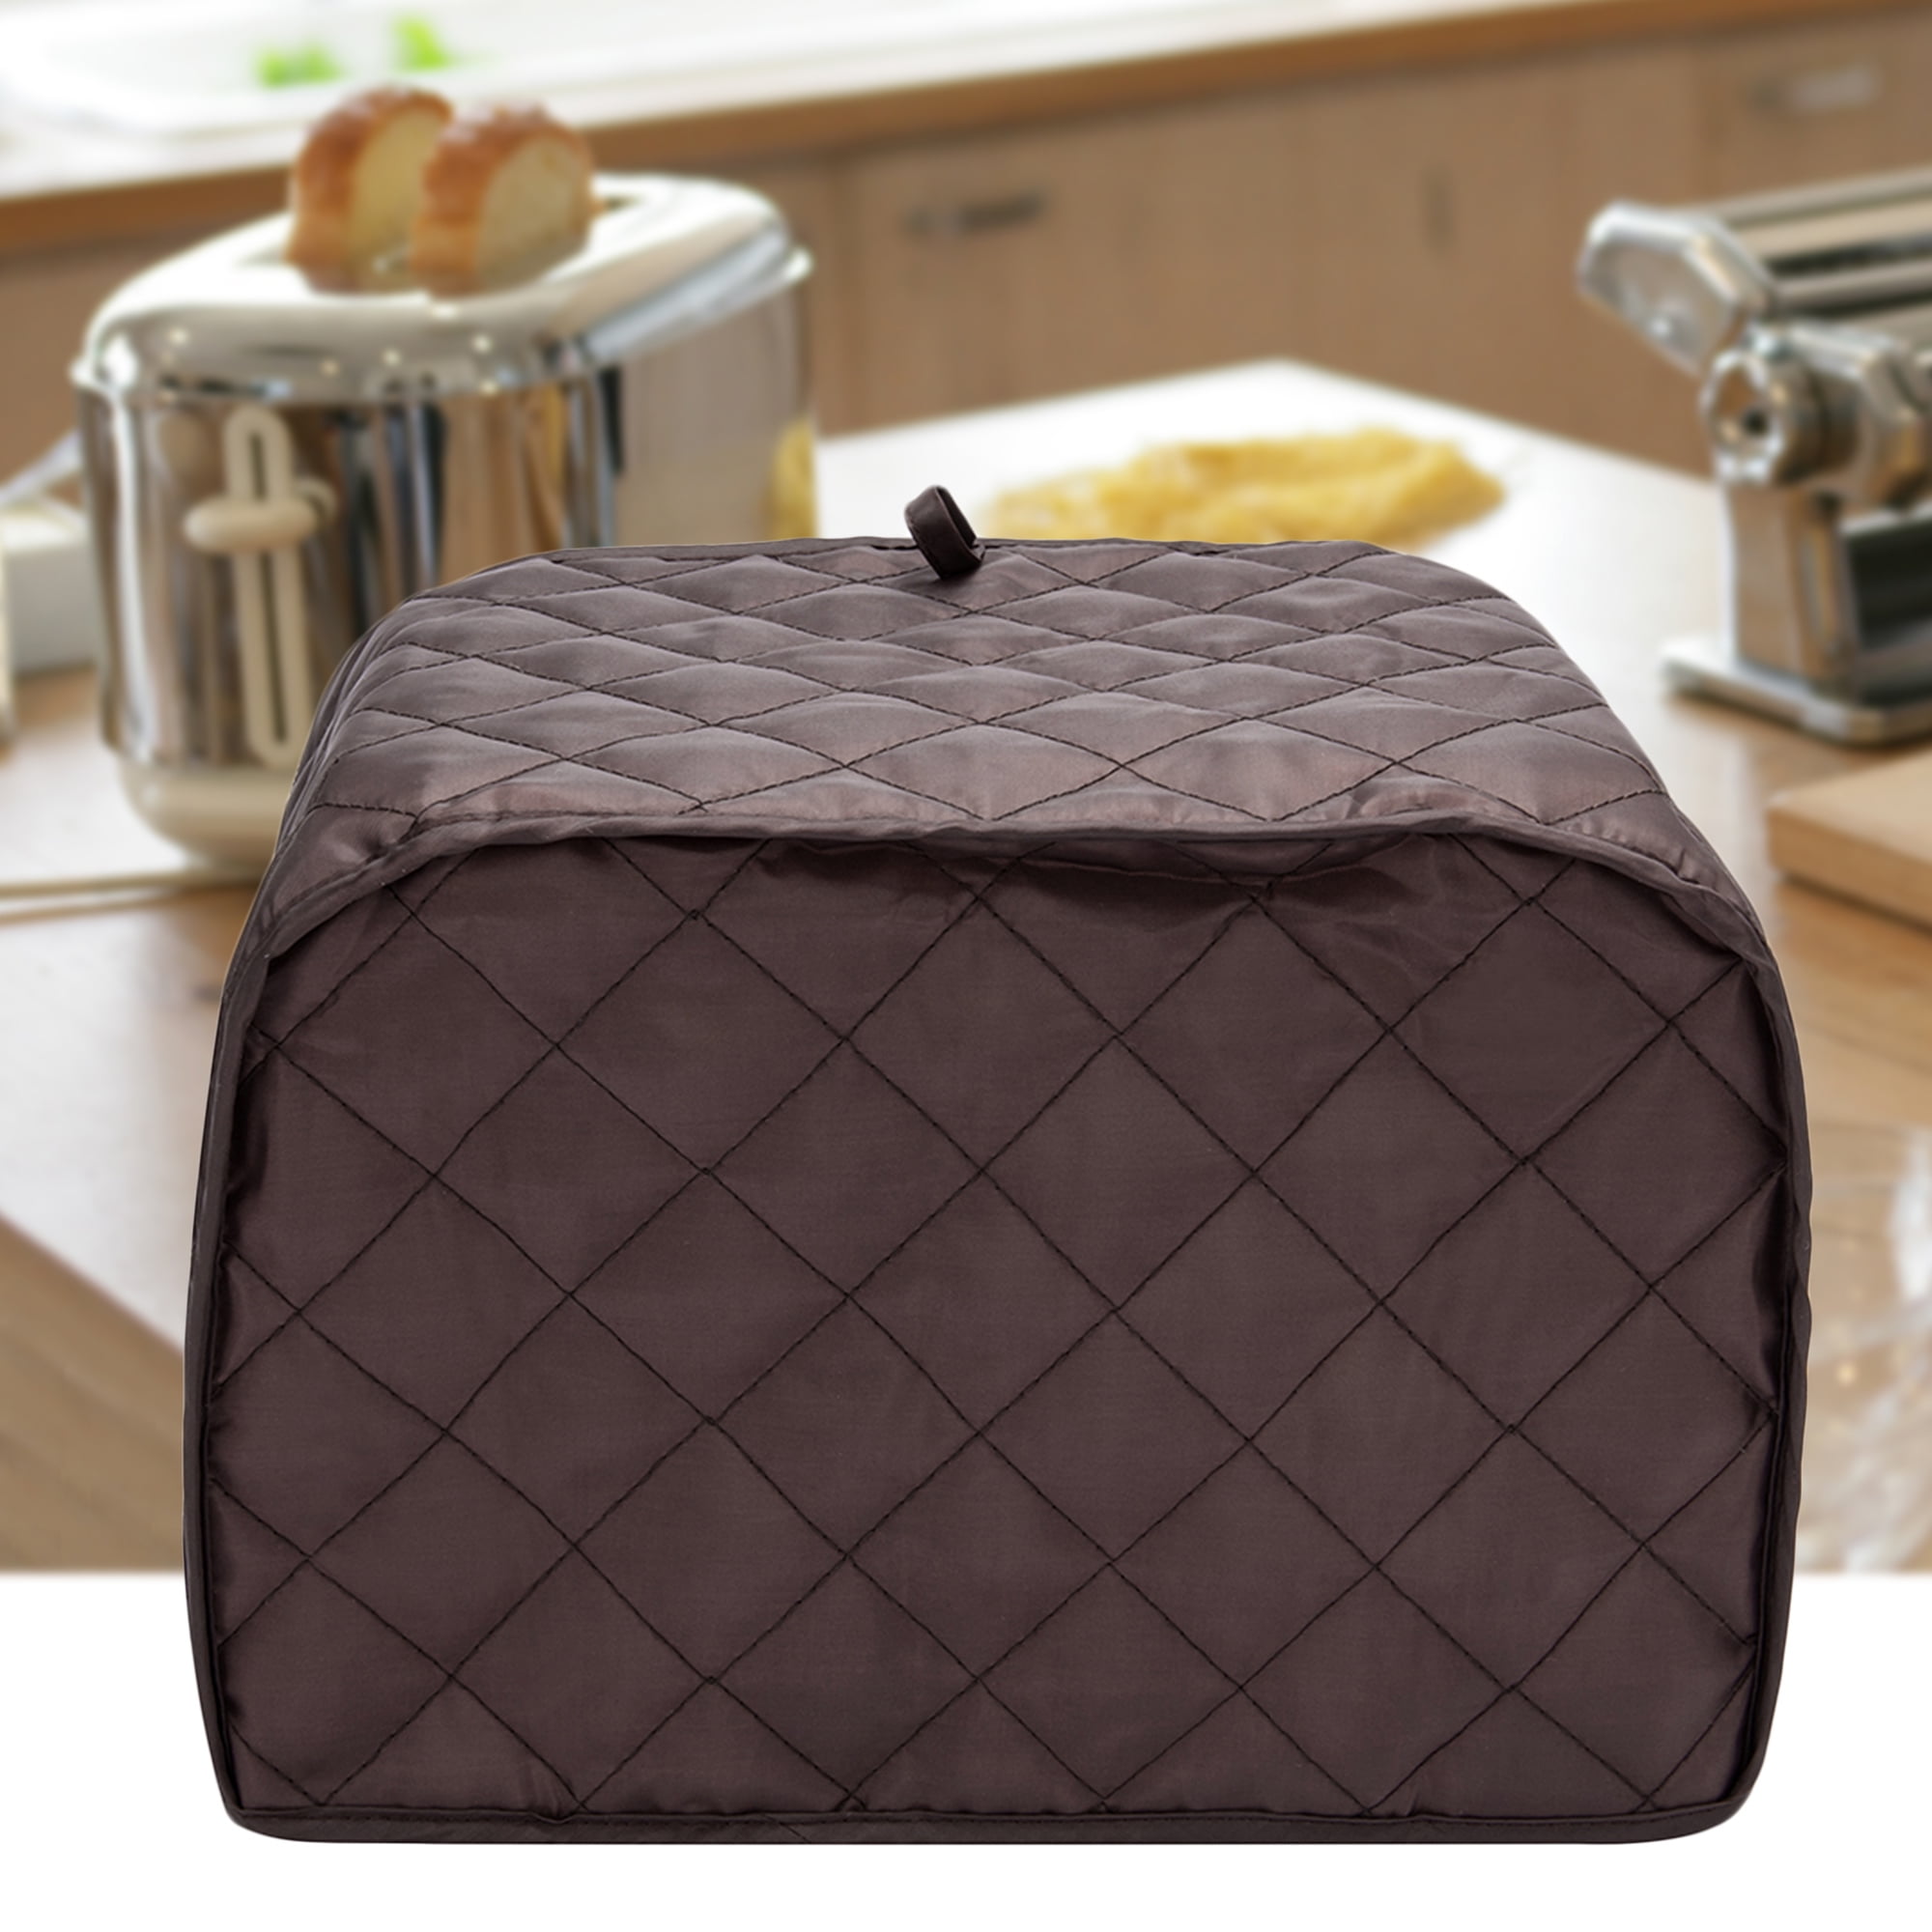 NEW COFFEE 2 SLICE APPLIANCE TOASTER COVER 